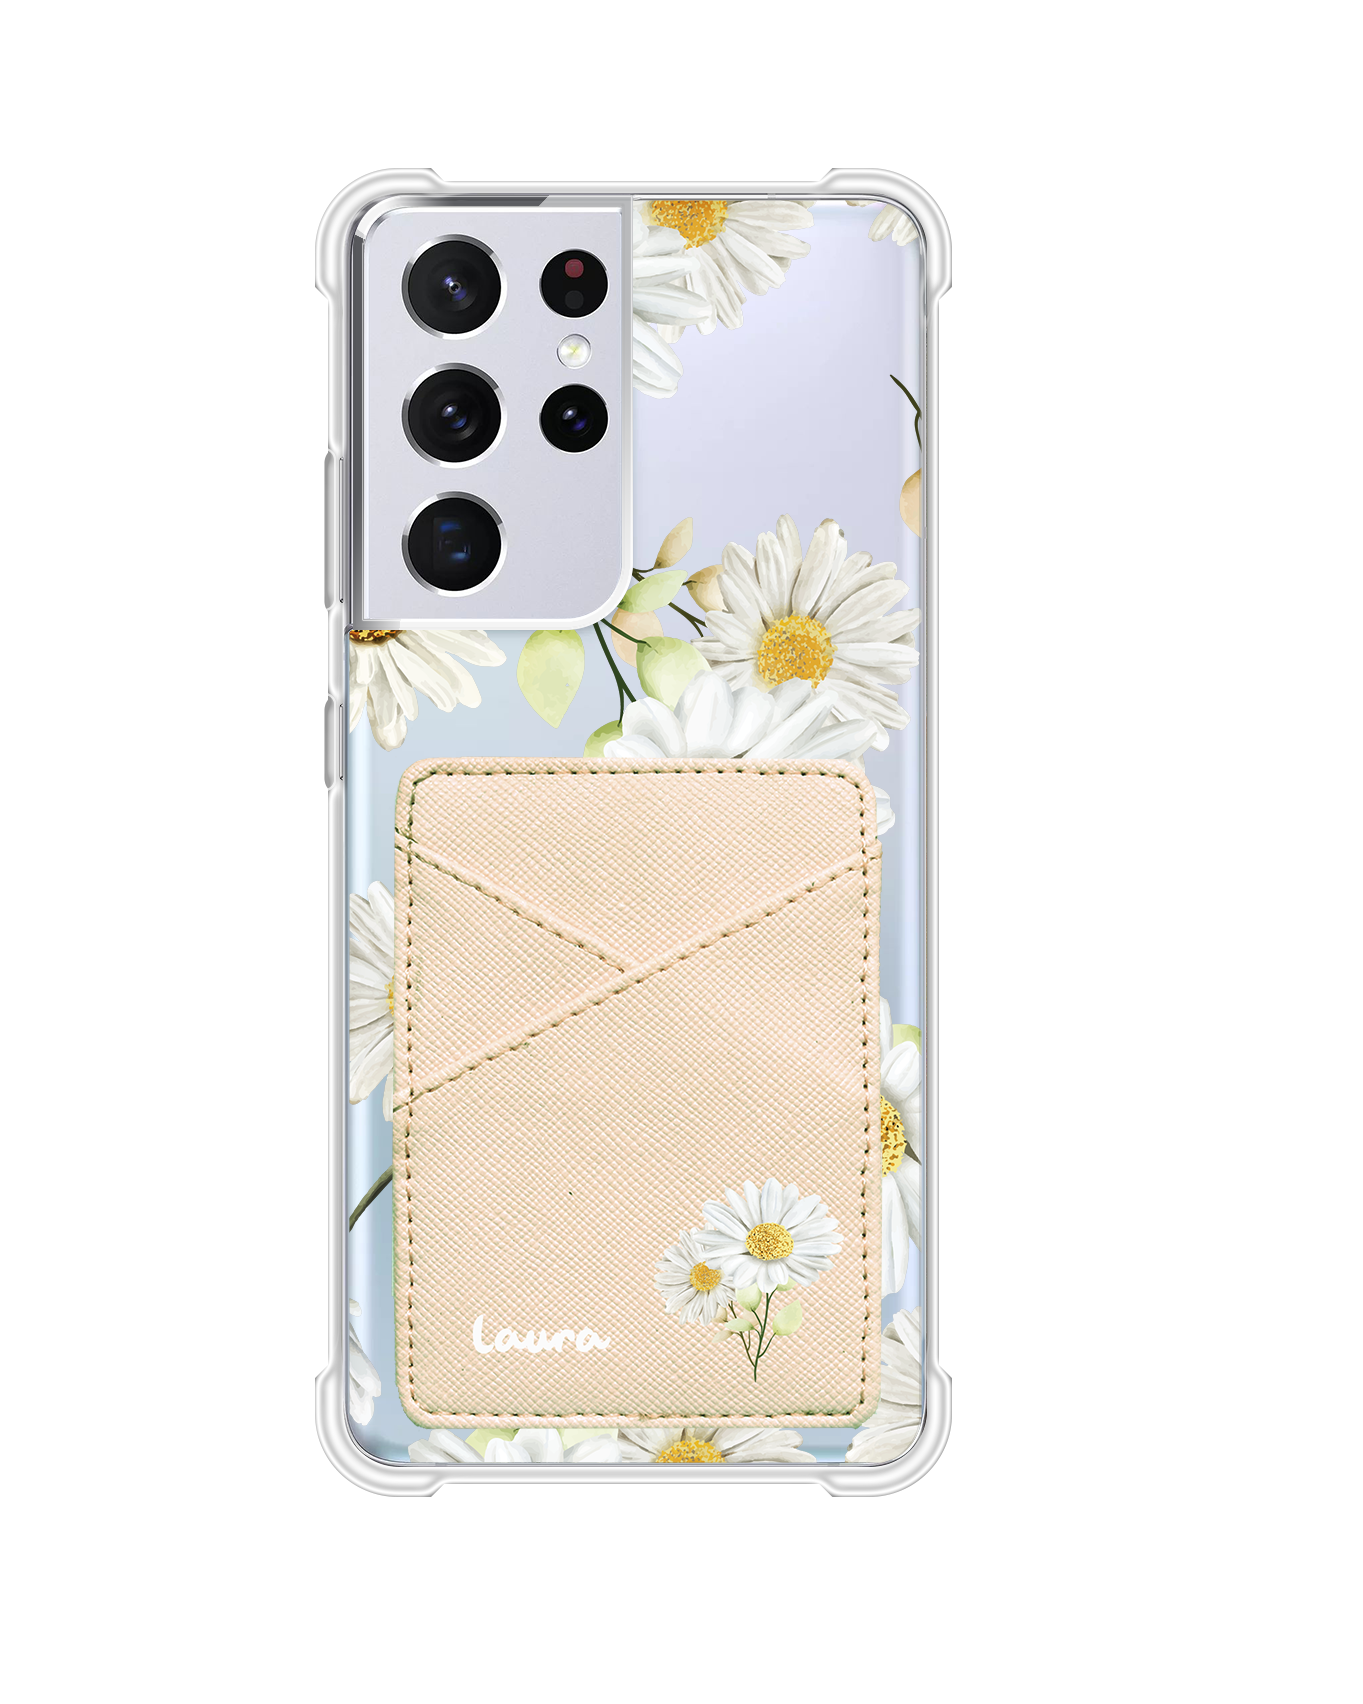 Android Phone Wallet Case - October Chrysanthemum 1.0